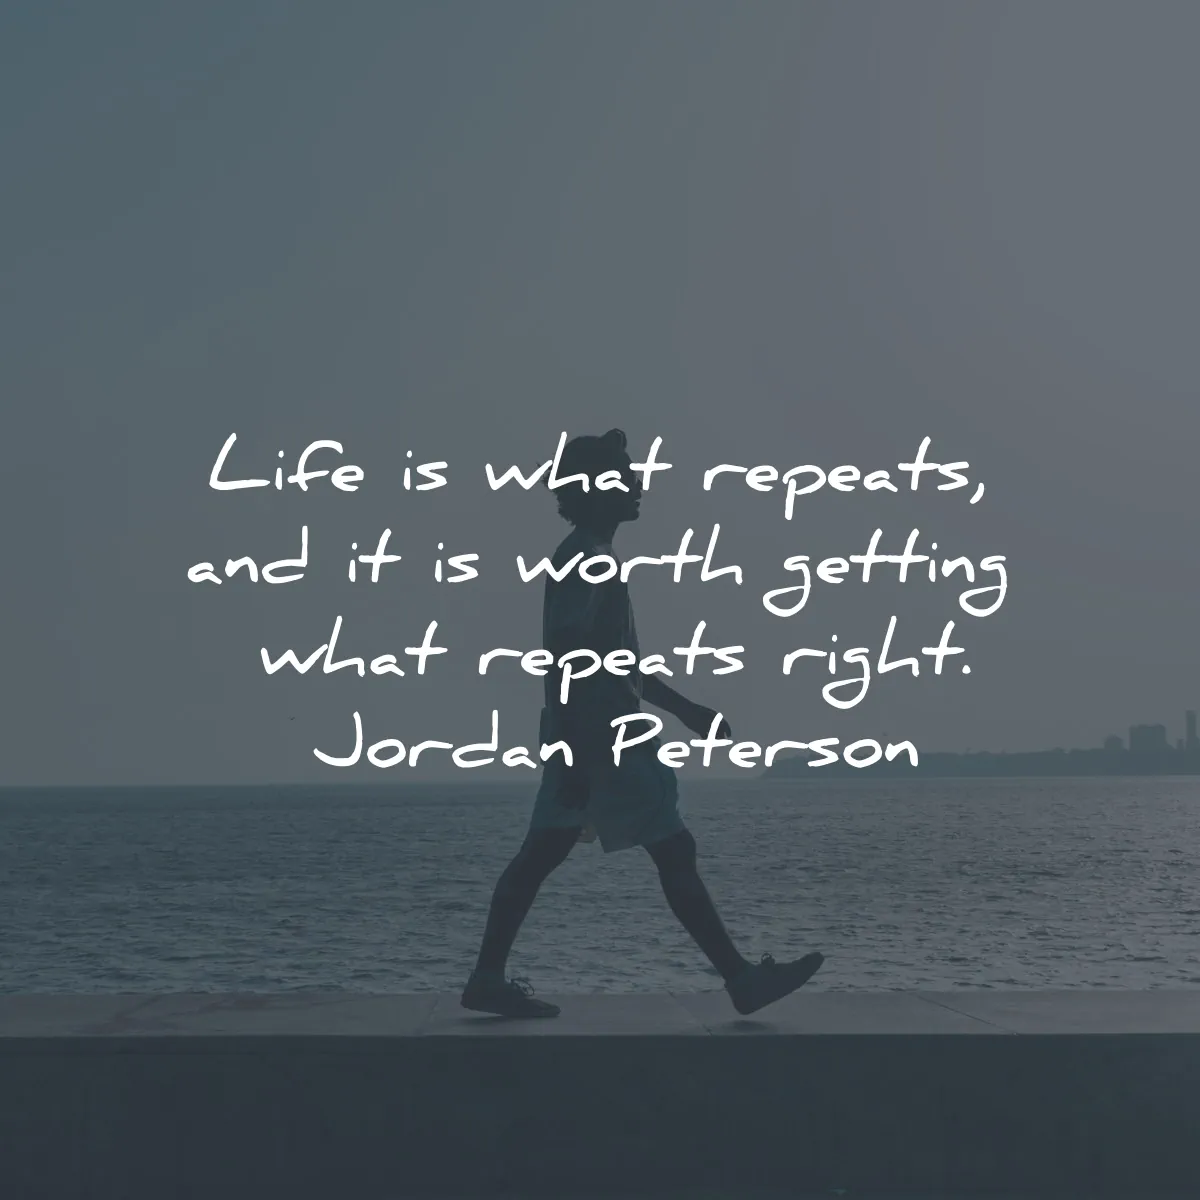 beyond order quotes summary jordan peterson life repeats worth getting right wisdom